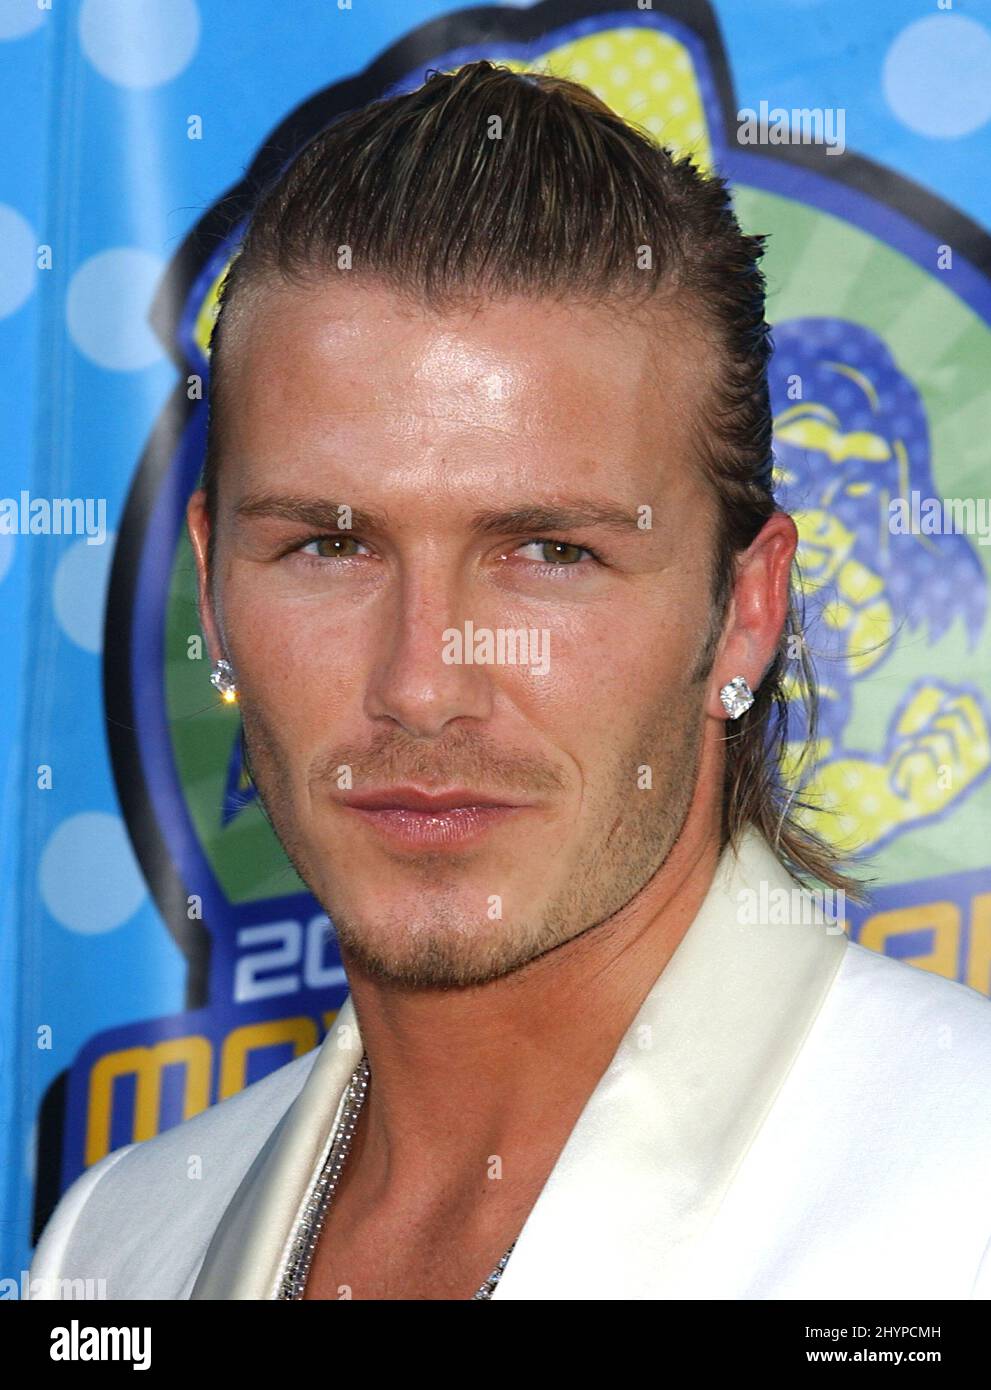 DAVID BECKHAM ATTENDS THE 2003 MTV MOVIE AWARDS IN LOS ANGELES. PICTURE ...